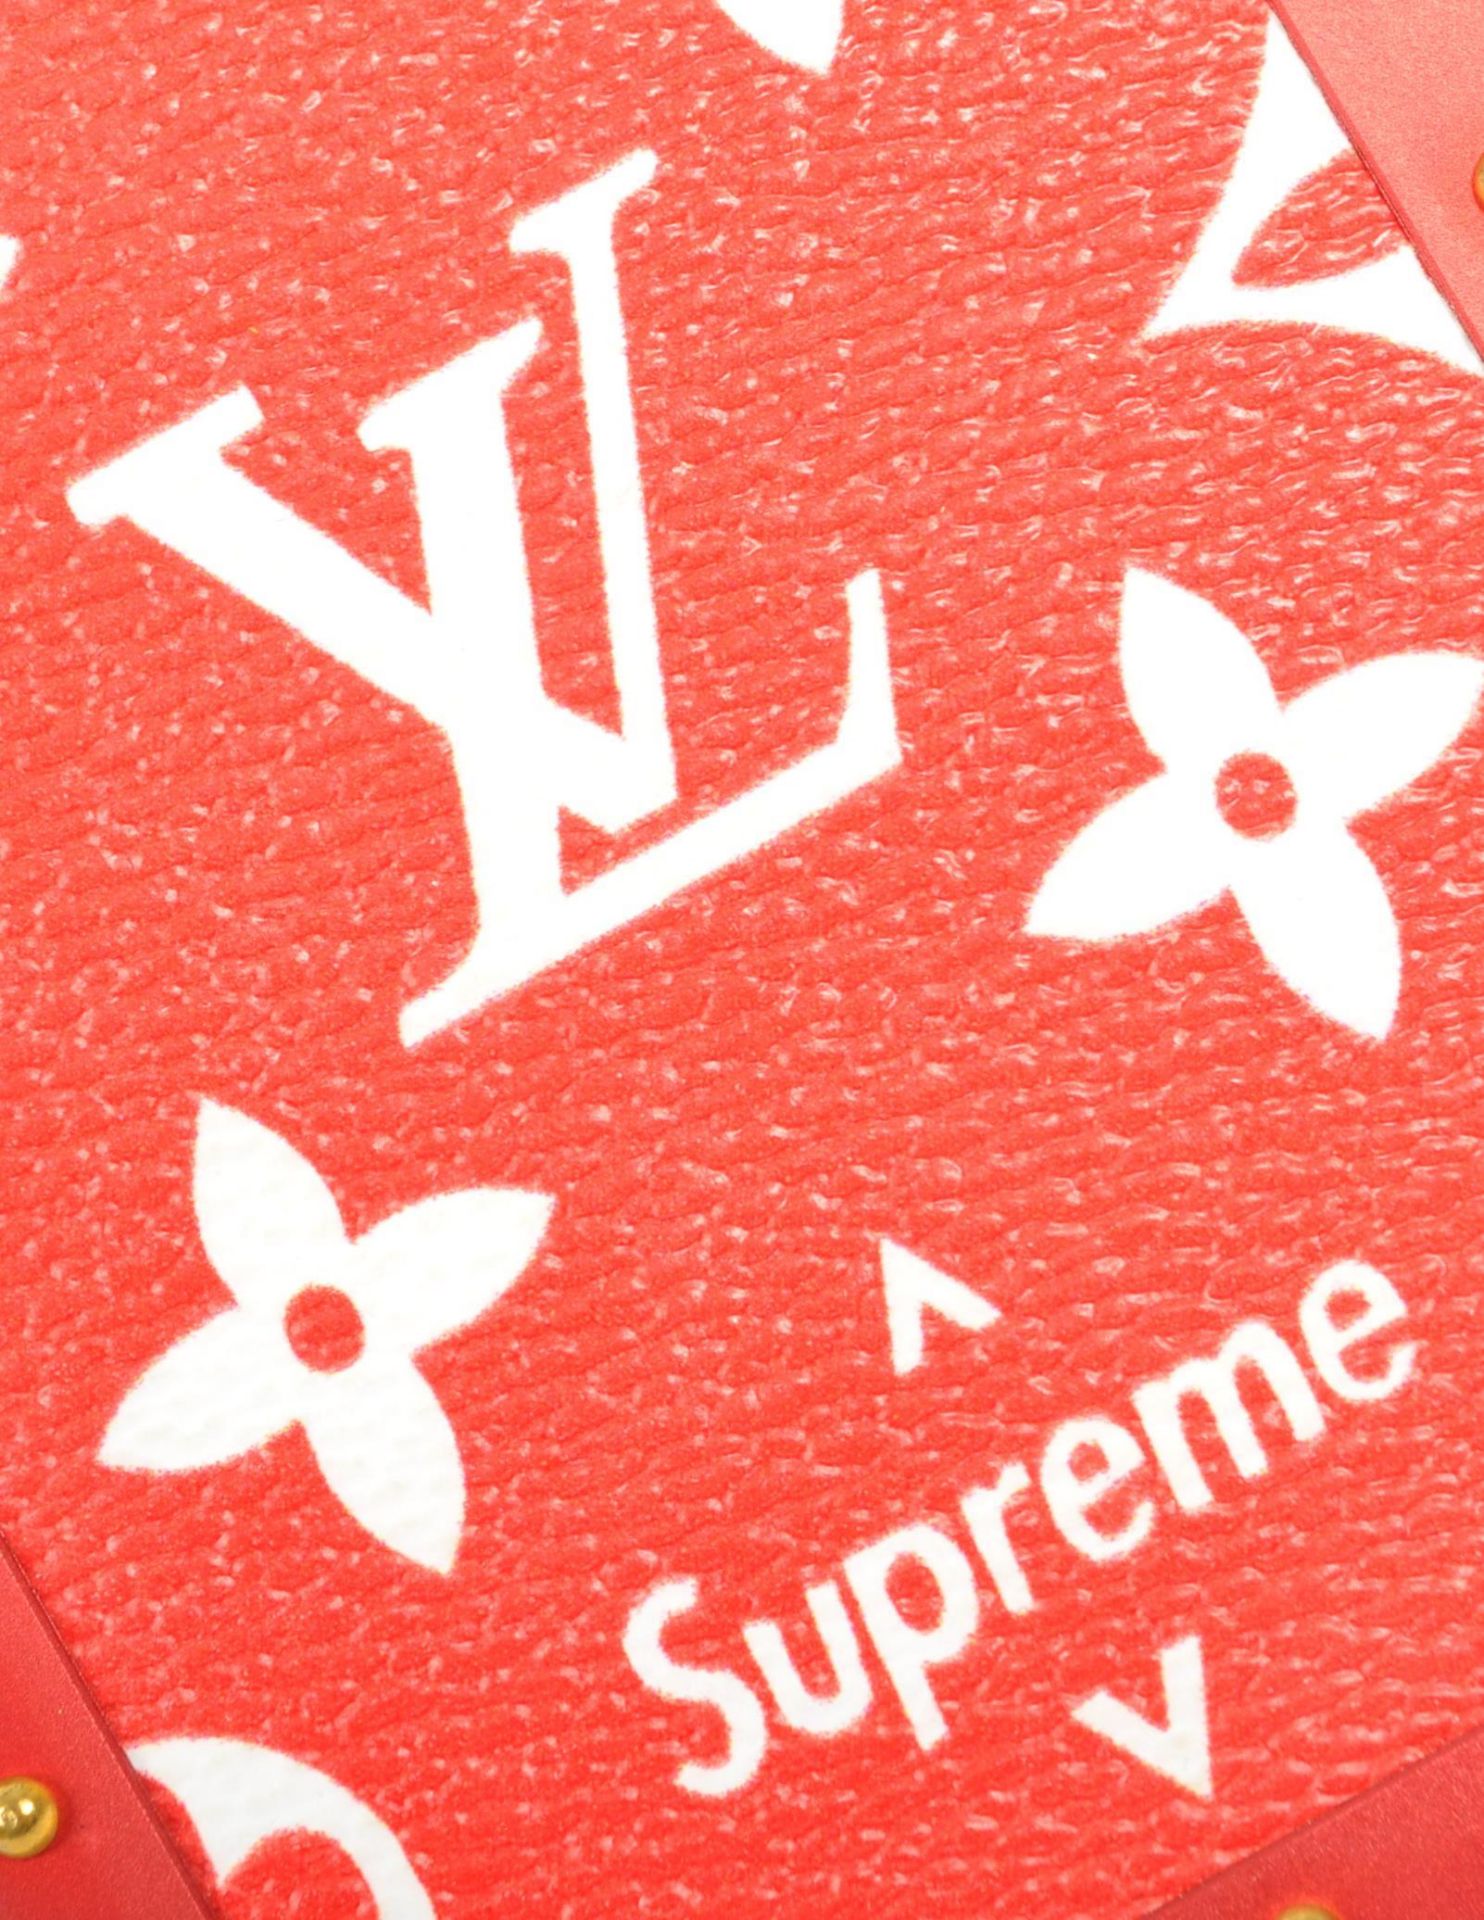 LOUIS VUITTON X SUPREME RED / GOLD IPHONE 7 CASE IN BOX - Image 5 of 7